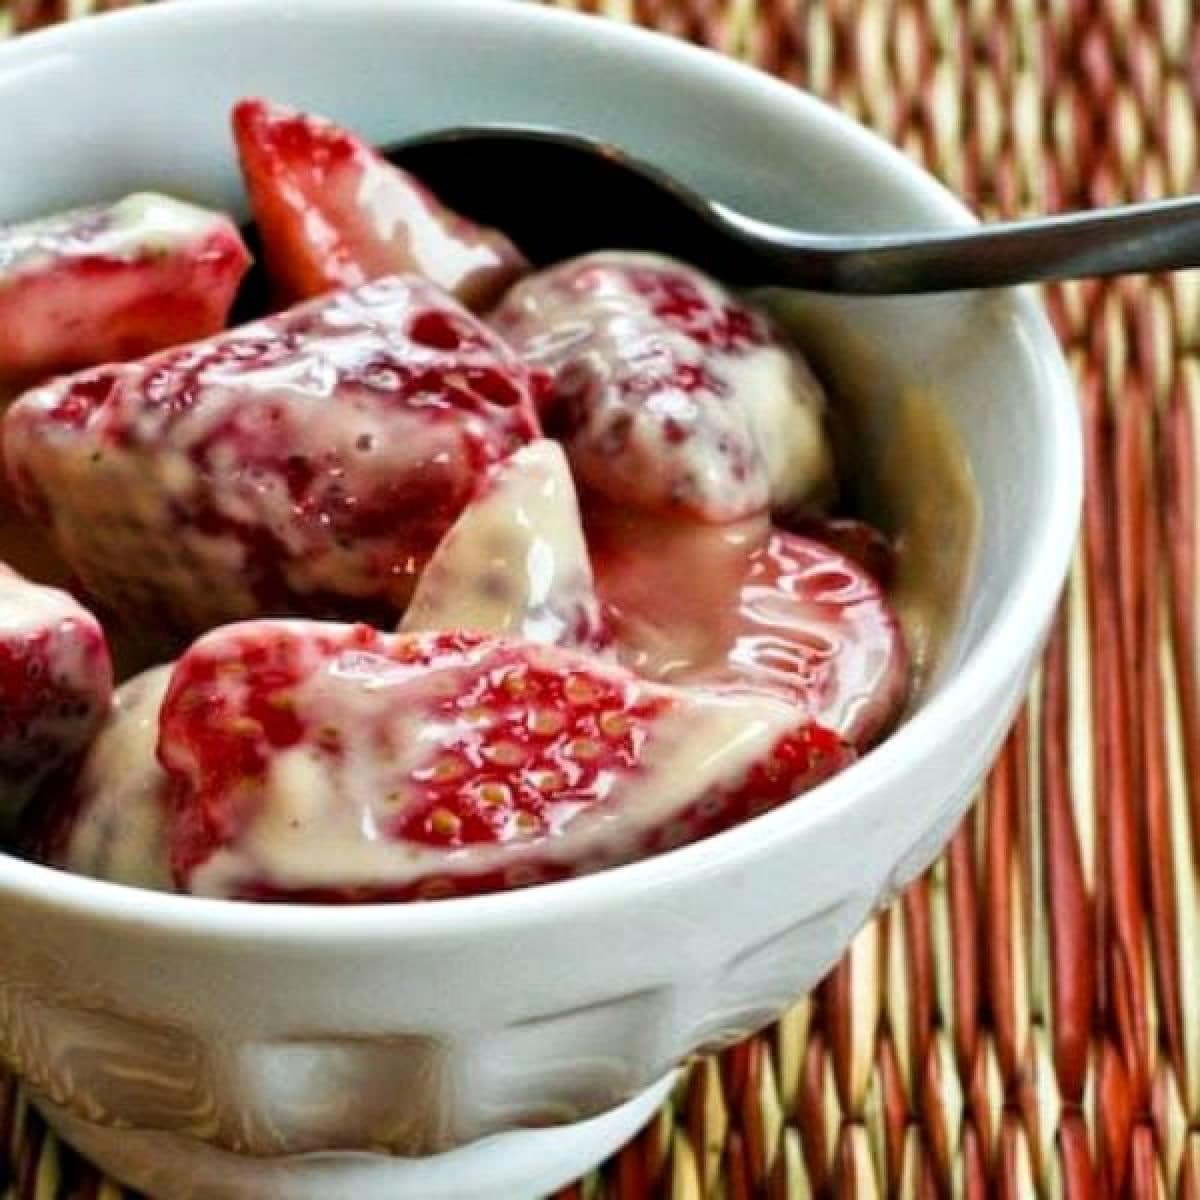 Square image of Strawberries Romanoff shown in serving dish with spoon.